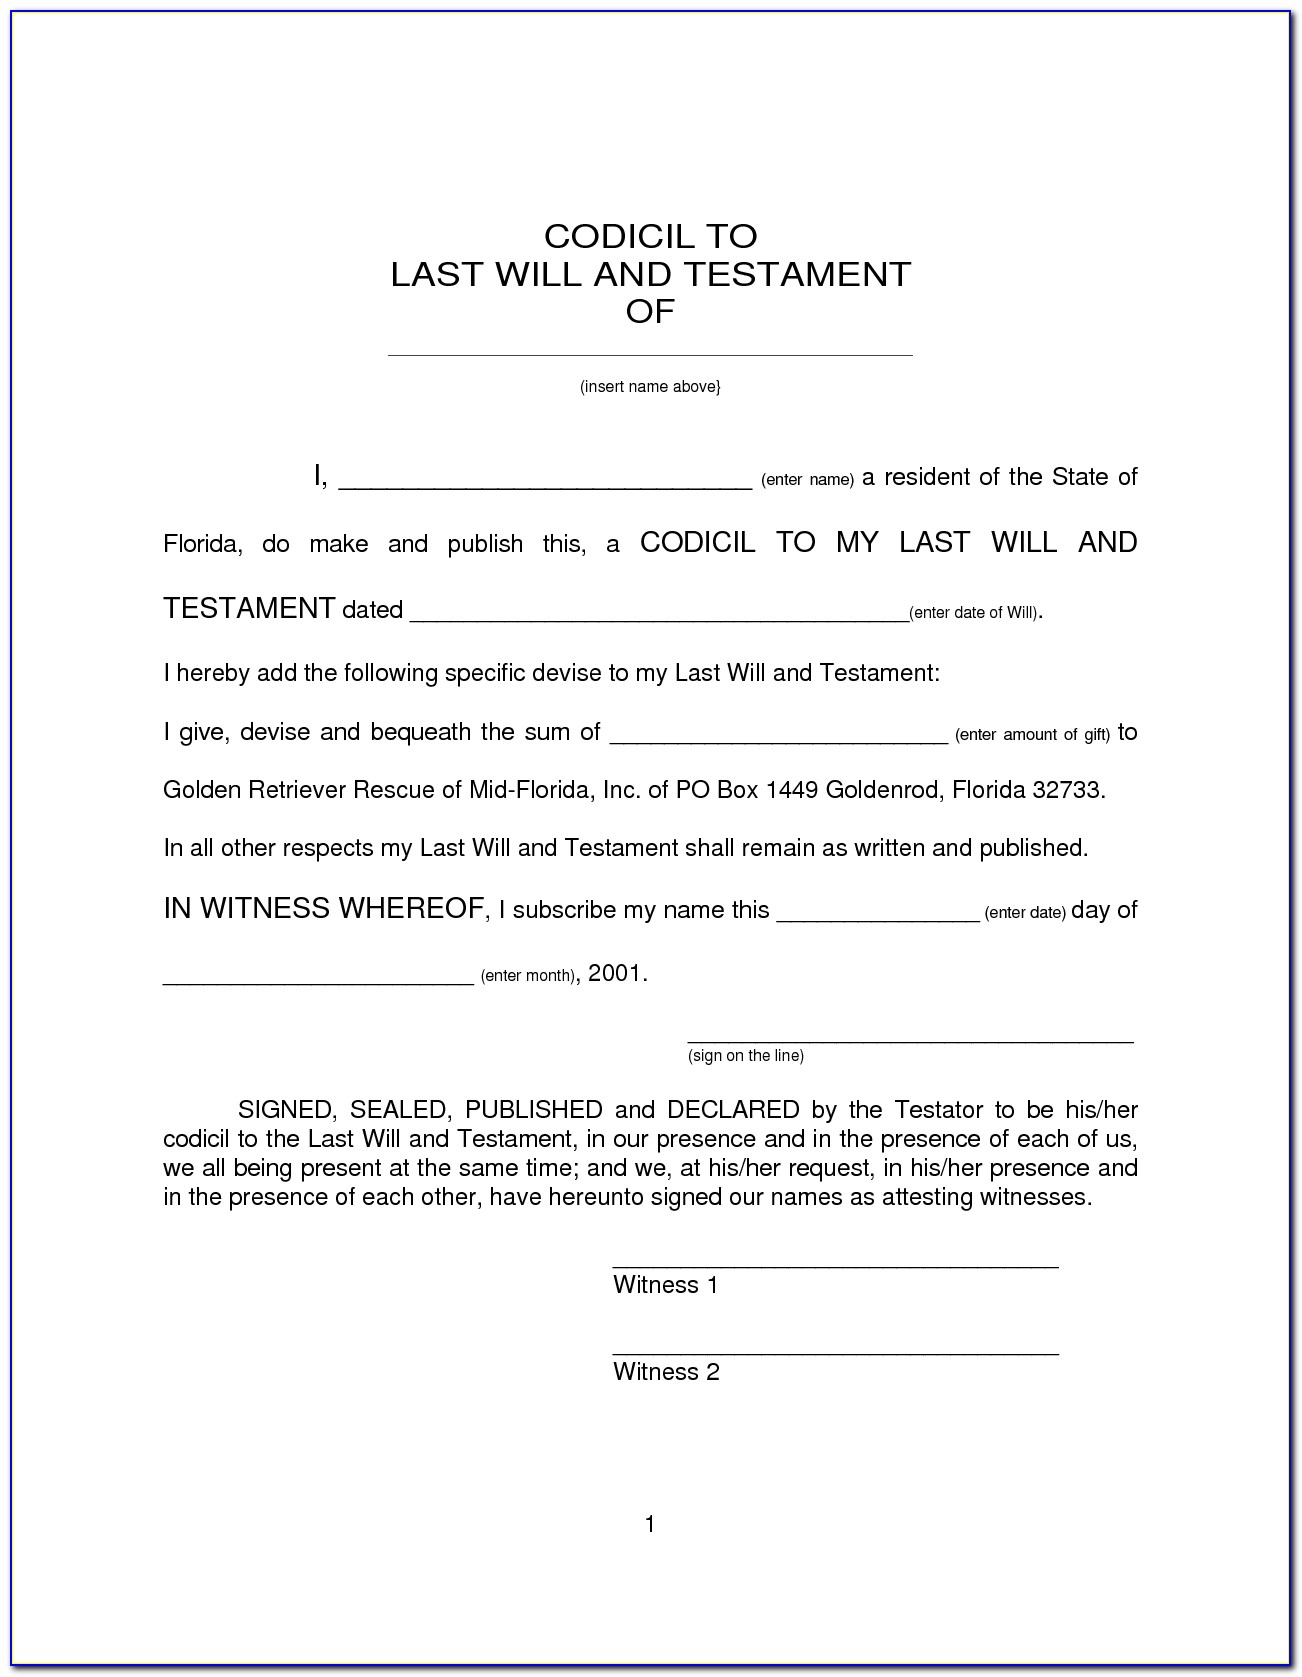 Last Will And Testament Template (6) | Best Agenda Templates Within Last Will And Testament Blank Forms